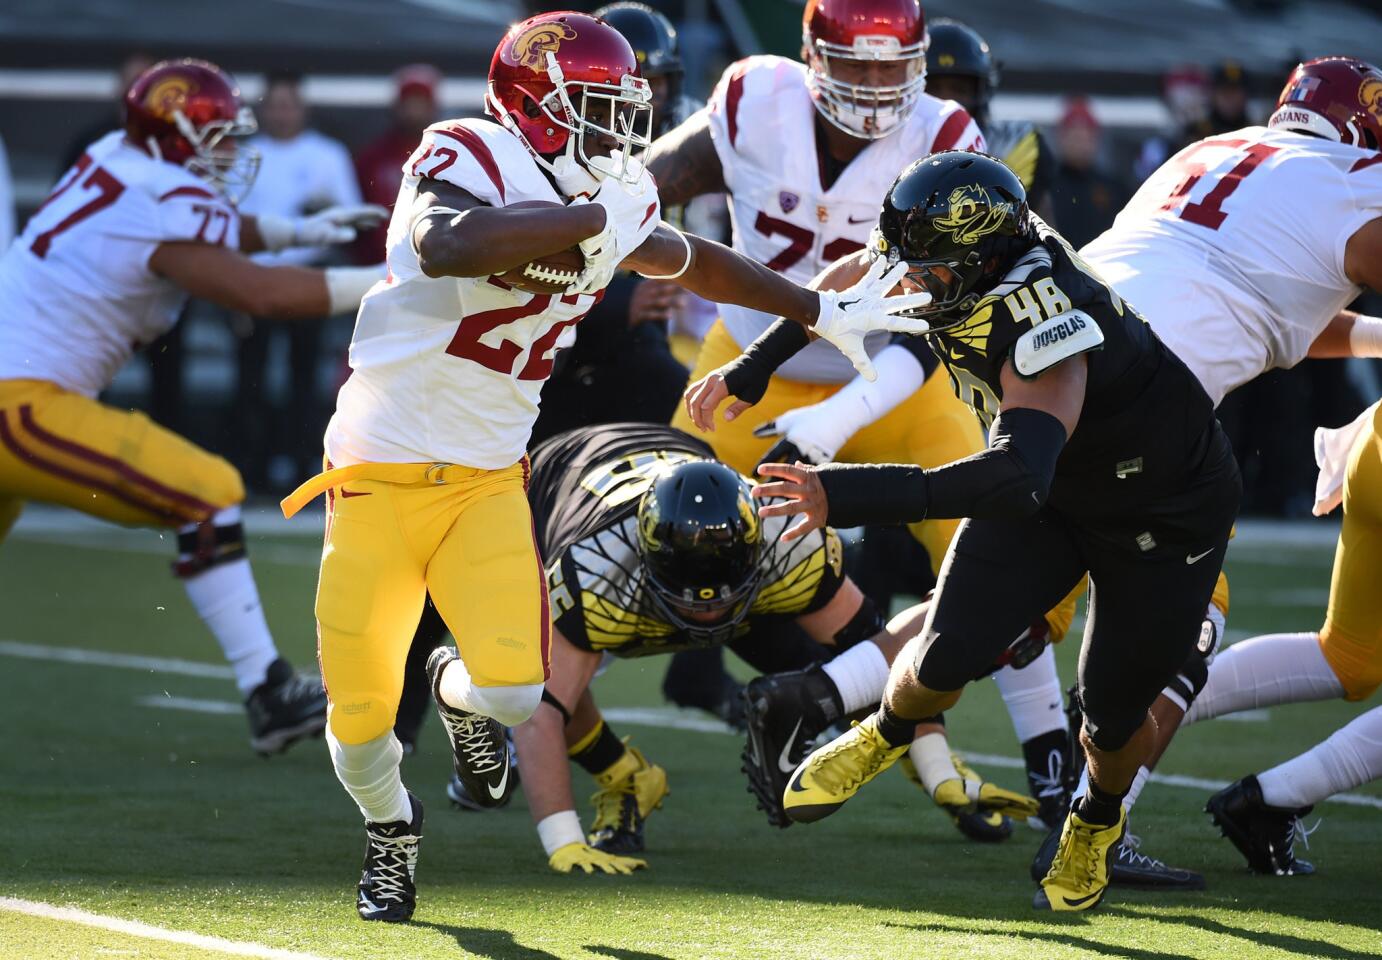 Tailback Justin Davis gives a solid effort in USC's loss at Oregon